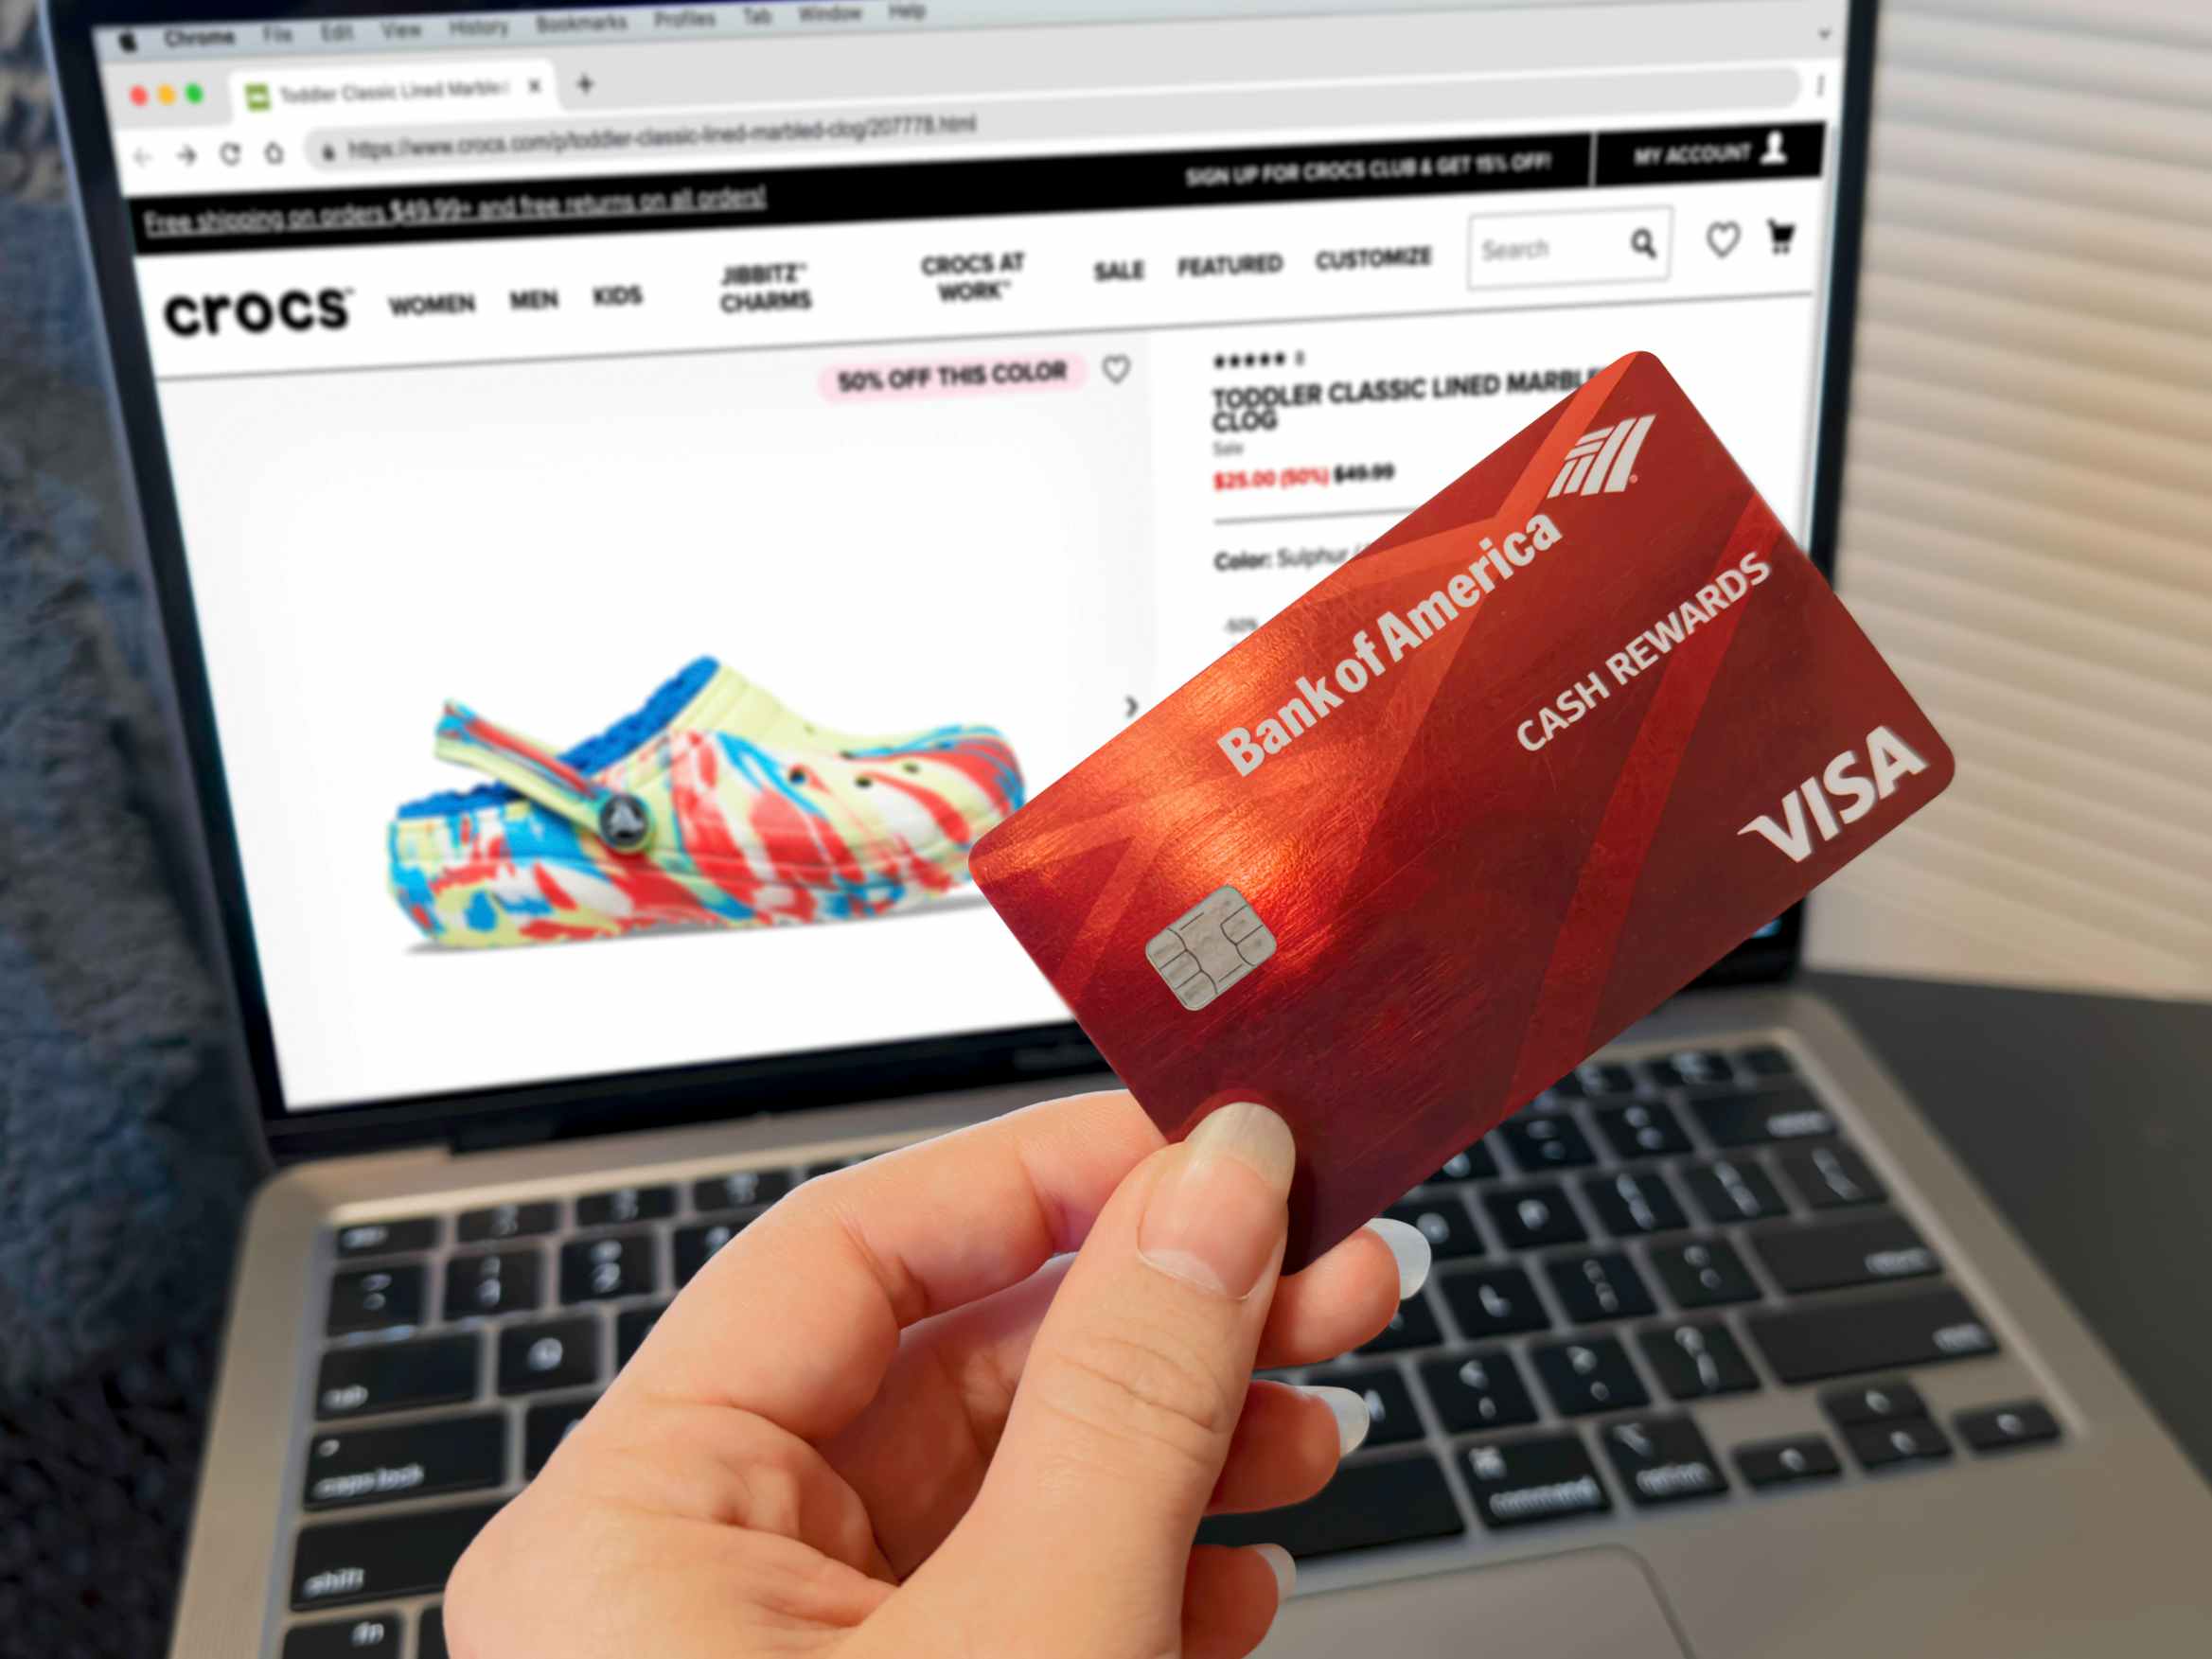 person shopping on crocs.com websitte with bank of america rewards card